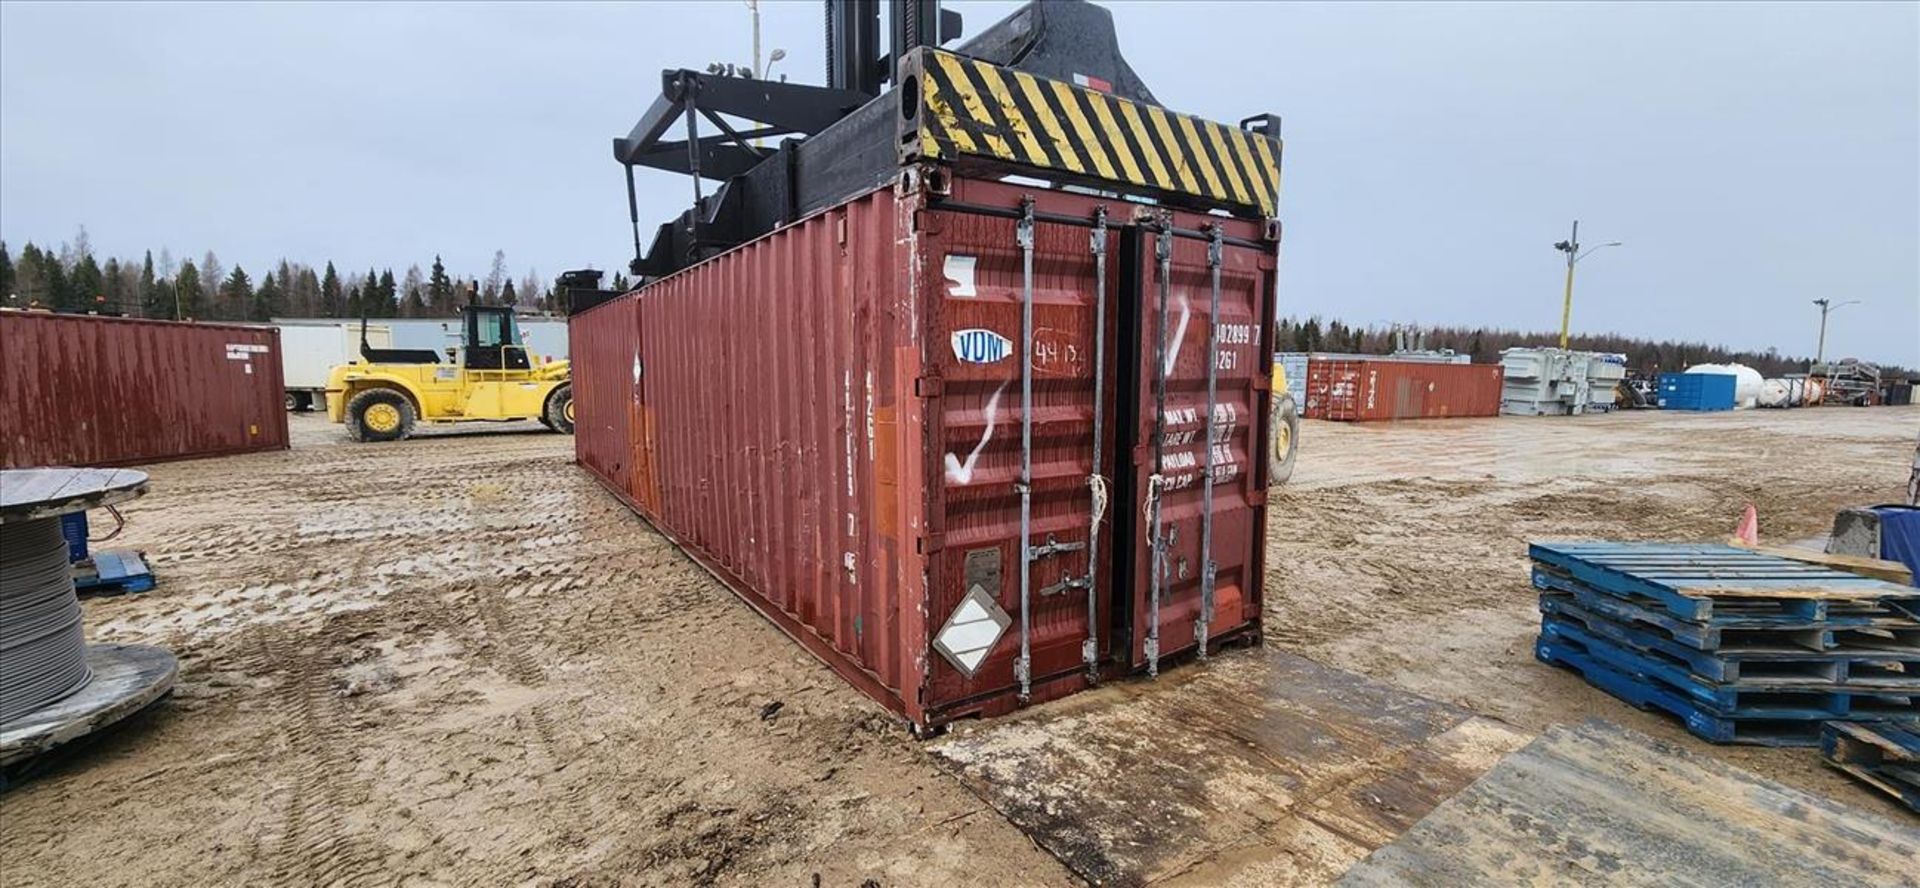 sea container, 40 ft. (delayed removal date applies) (Asset Location: Hallnor Yard) {Day 1} [TAG